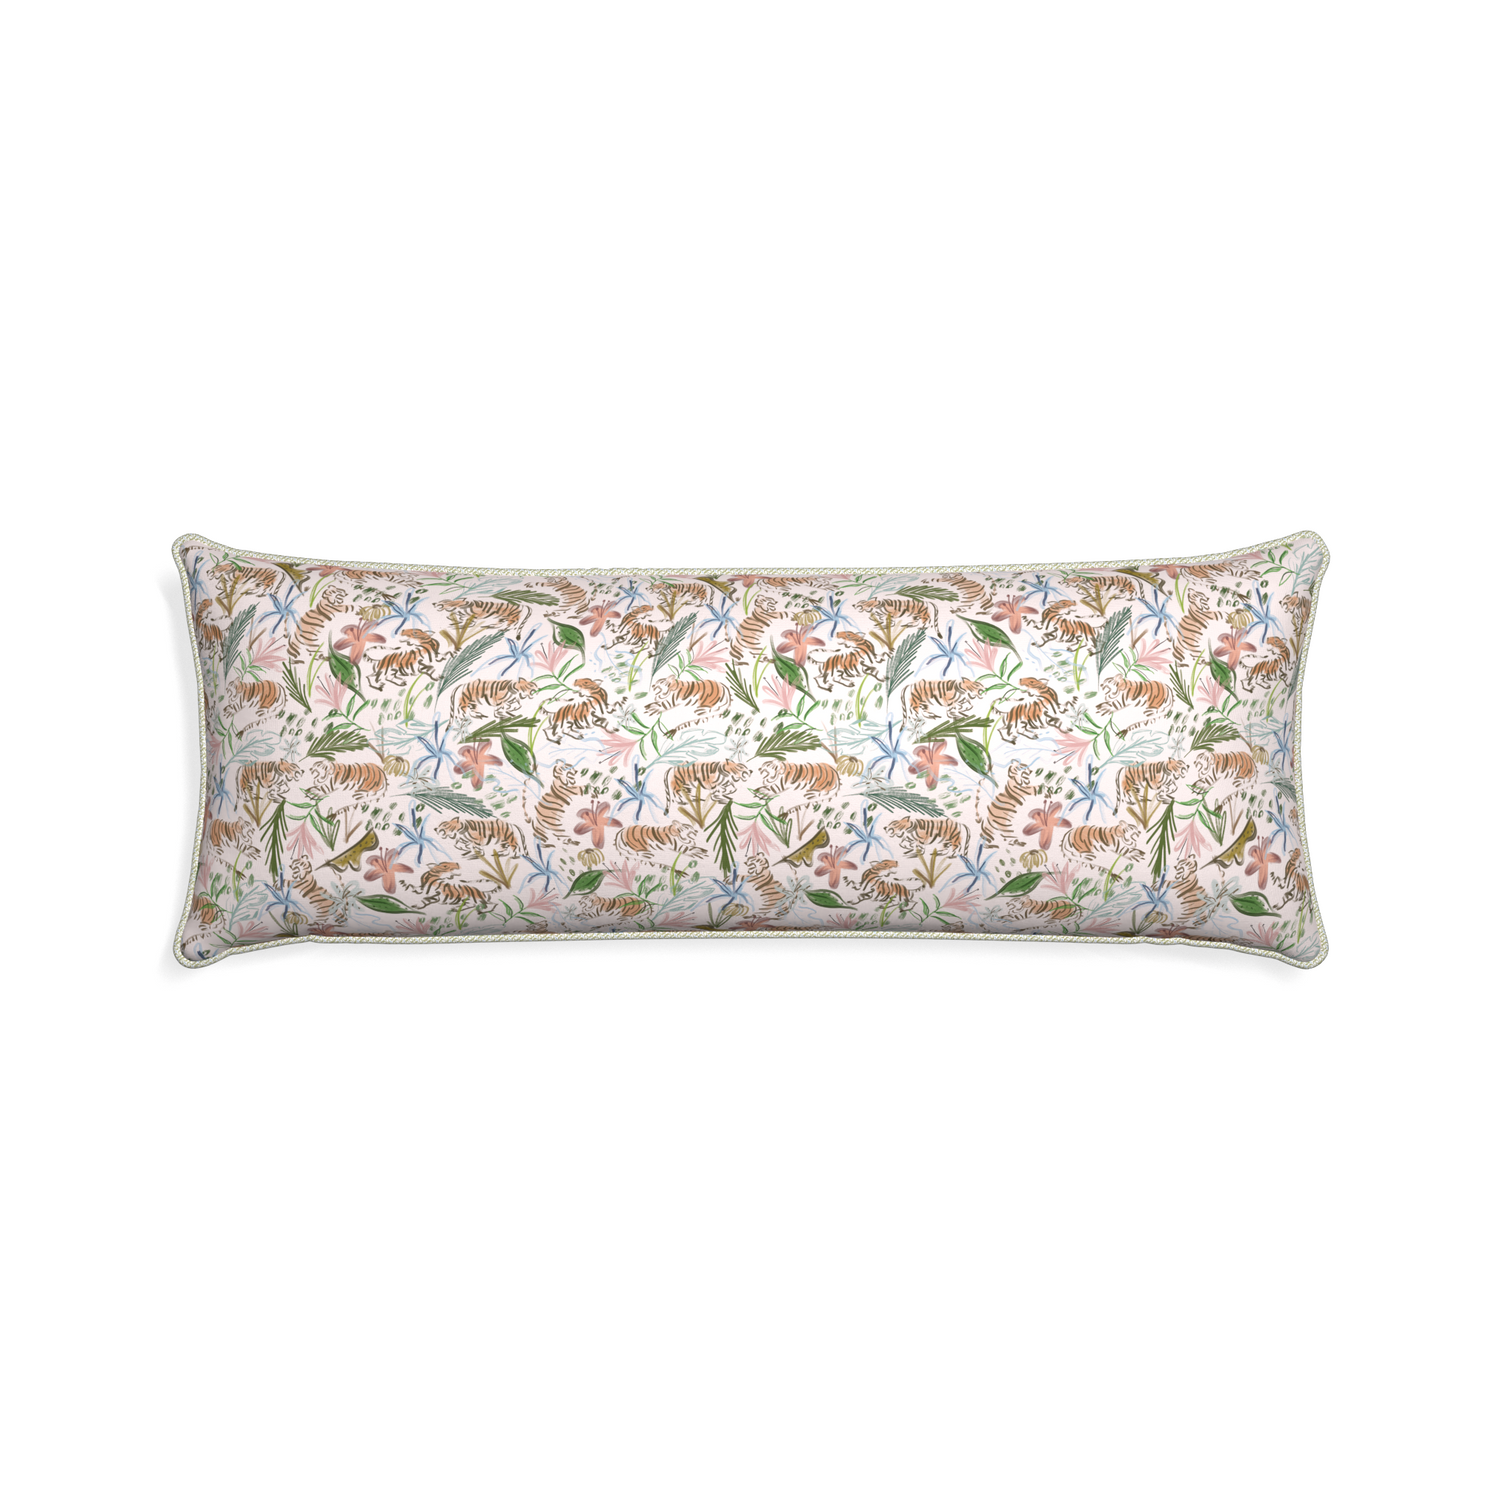 Xl-lumbar frida pink custom pink chinoiserie tigerpillow with l piping on white background